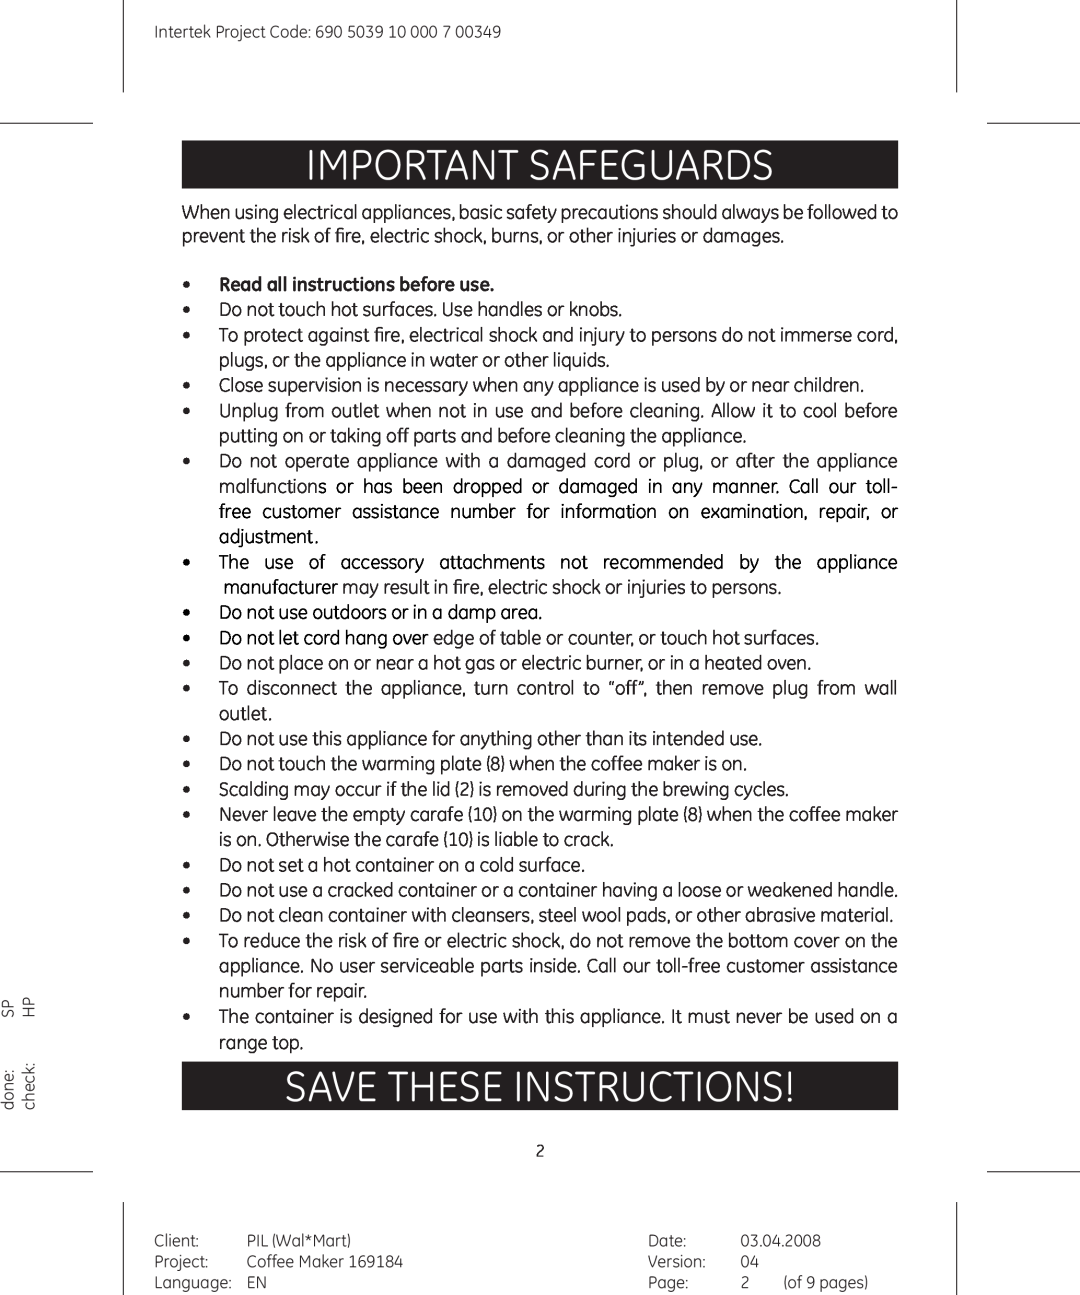 GE 681131691840, 690503910000700349 Important Safeguards, Save these instructions, Read all instructions before use 